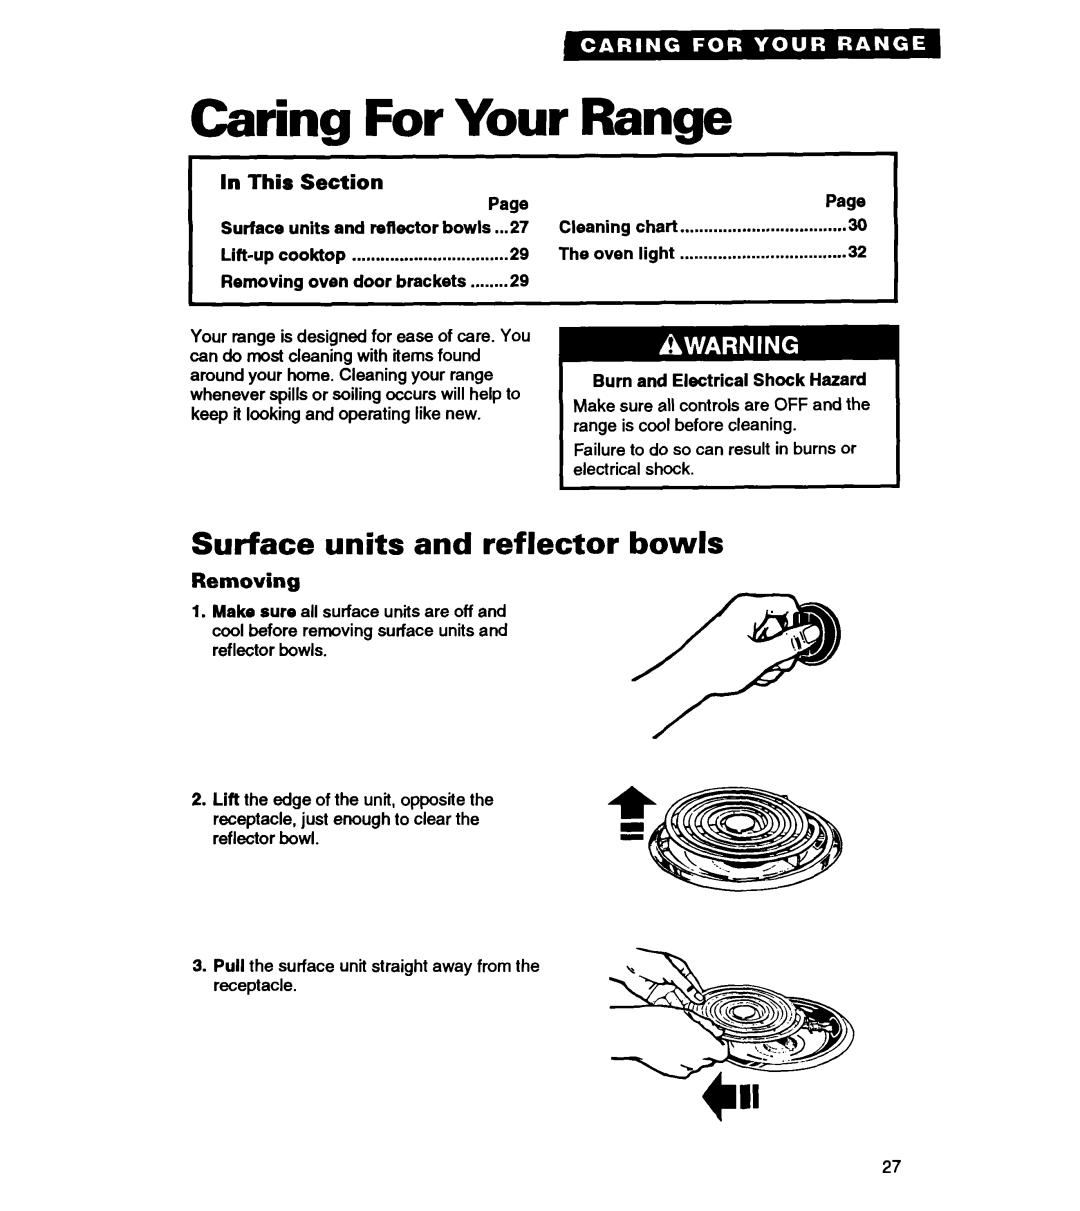 Whirlpool RS363PXY Caring For Your Range, Surface units and reflector bowls, In This Section, Removing, Cleaning, The oven 